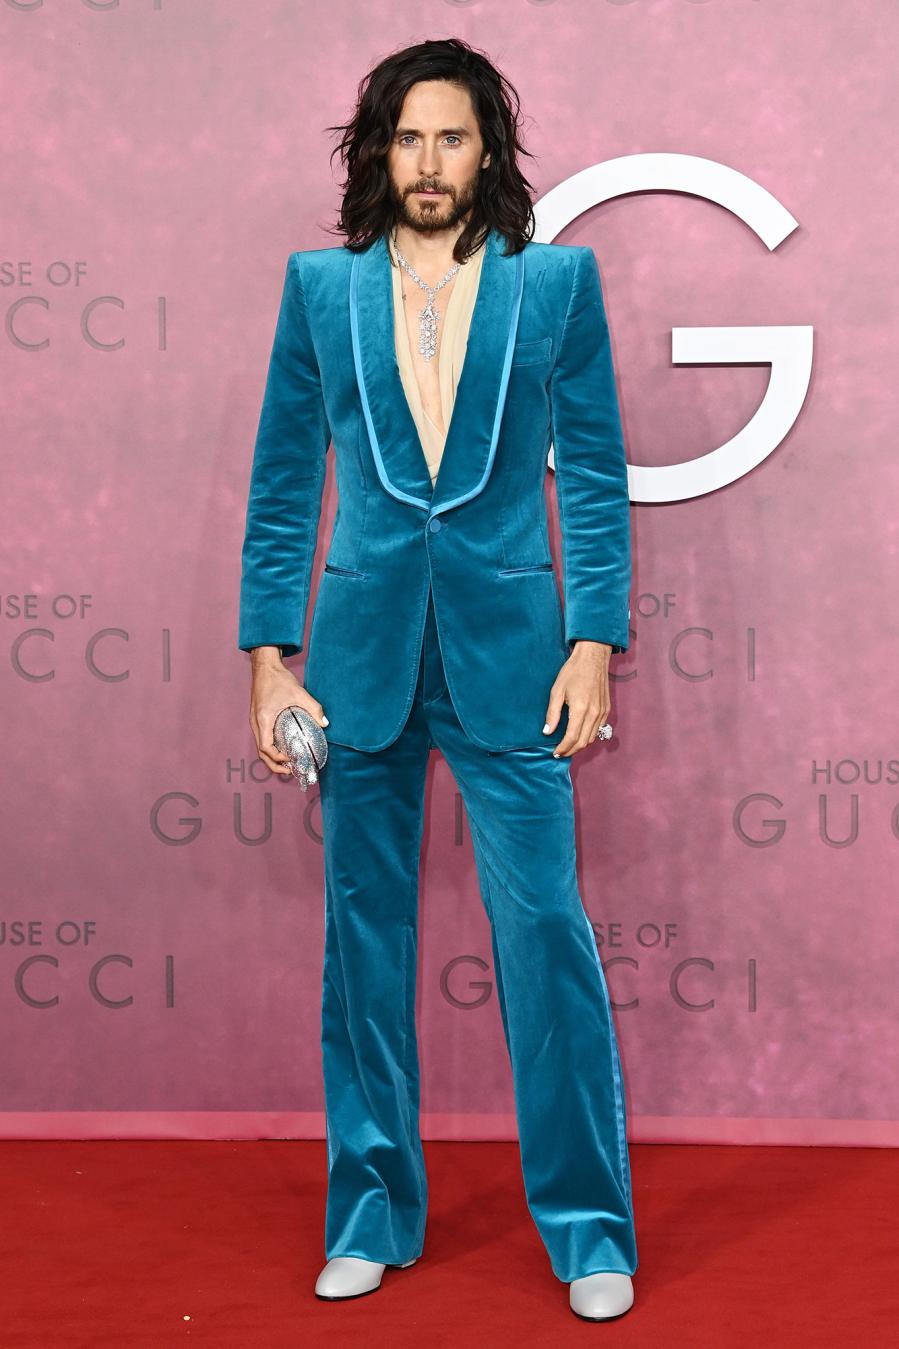 Lady Gaga House Gucci Premiere Dress Has Us Speechless Jared Leto